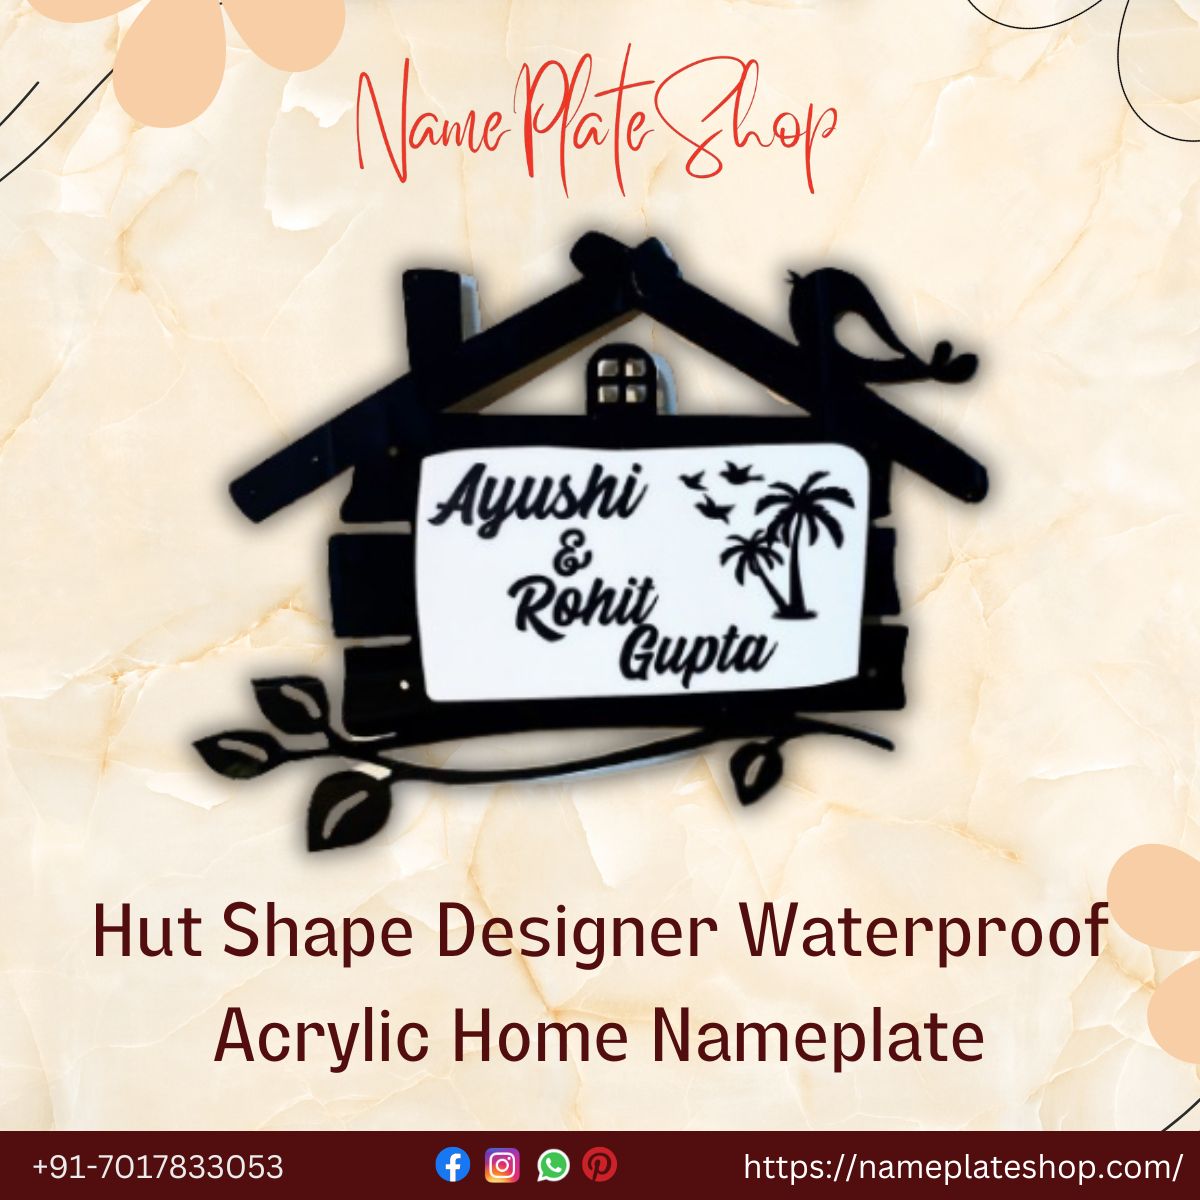 Enhance Style with Waterproof Nameplates